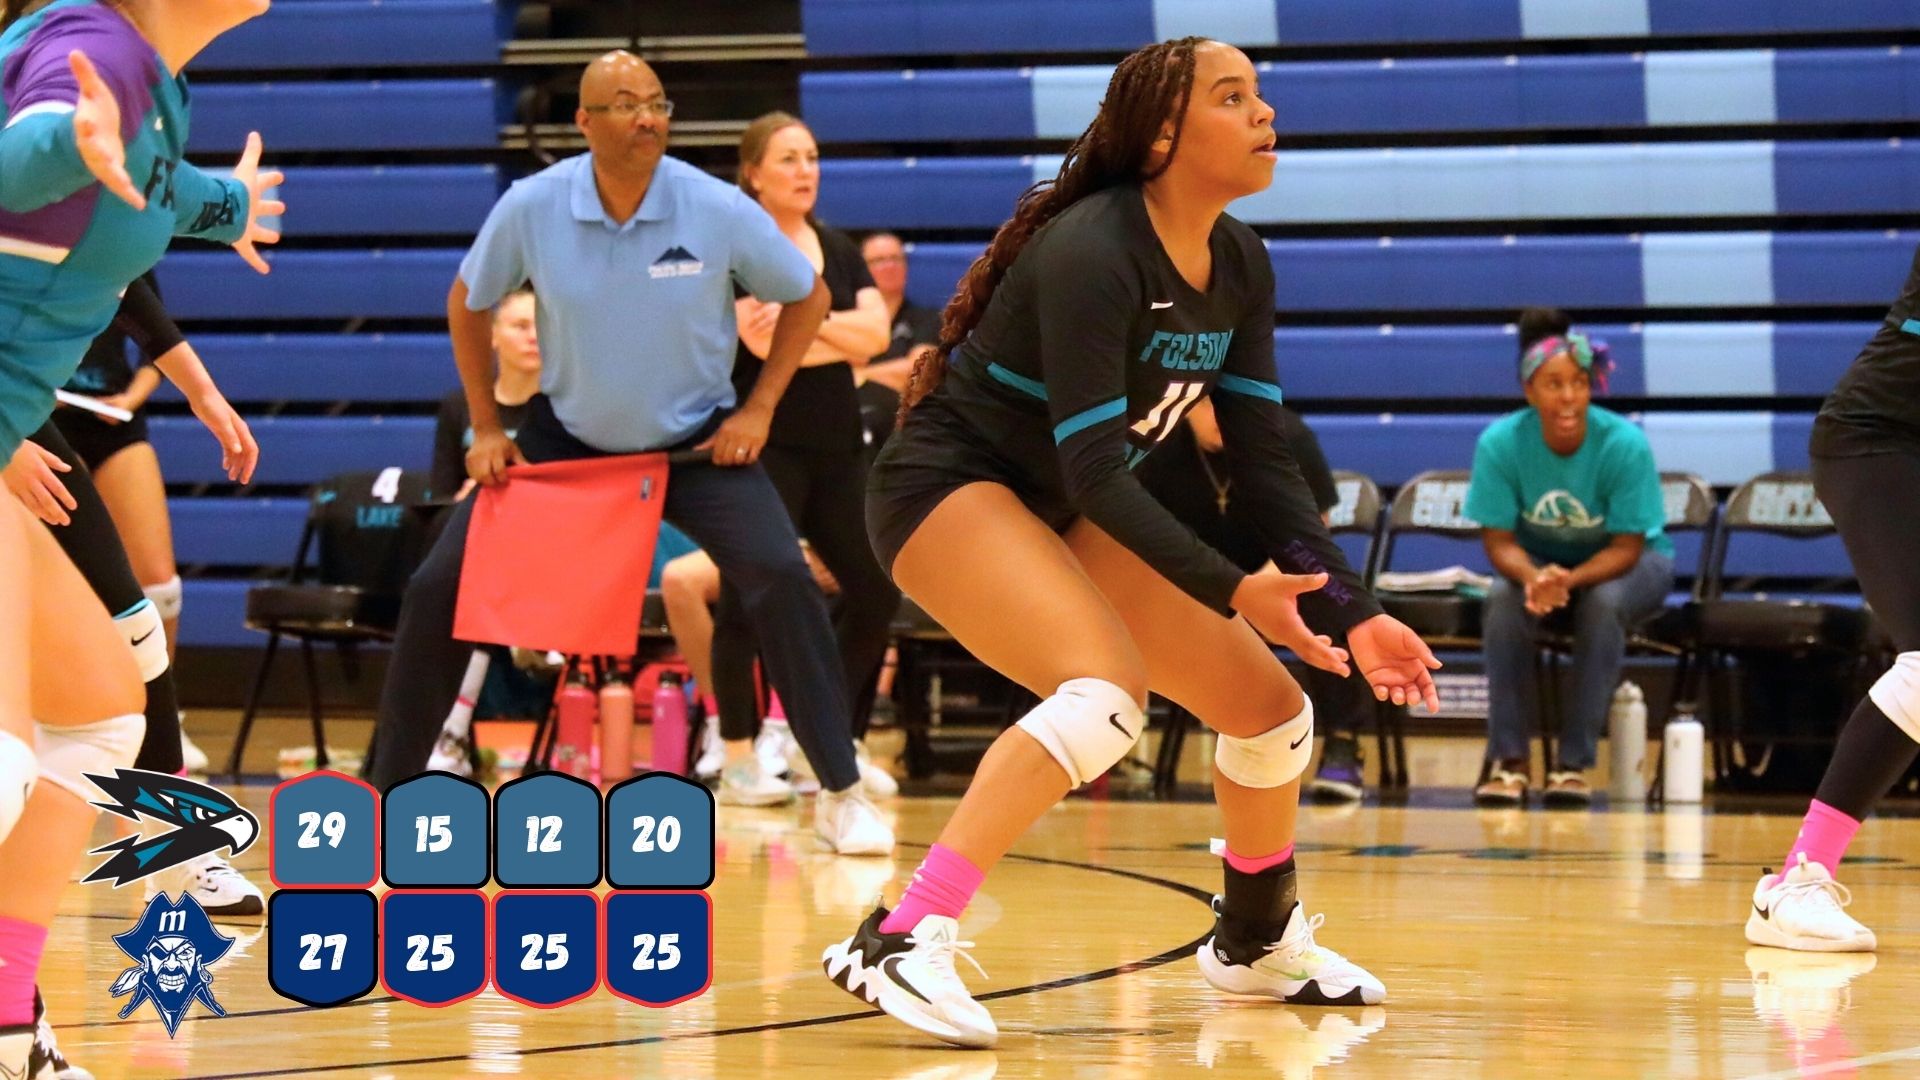 Pirates Defeat Falcons in 4 sets